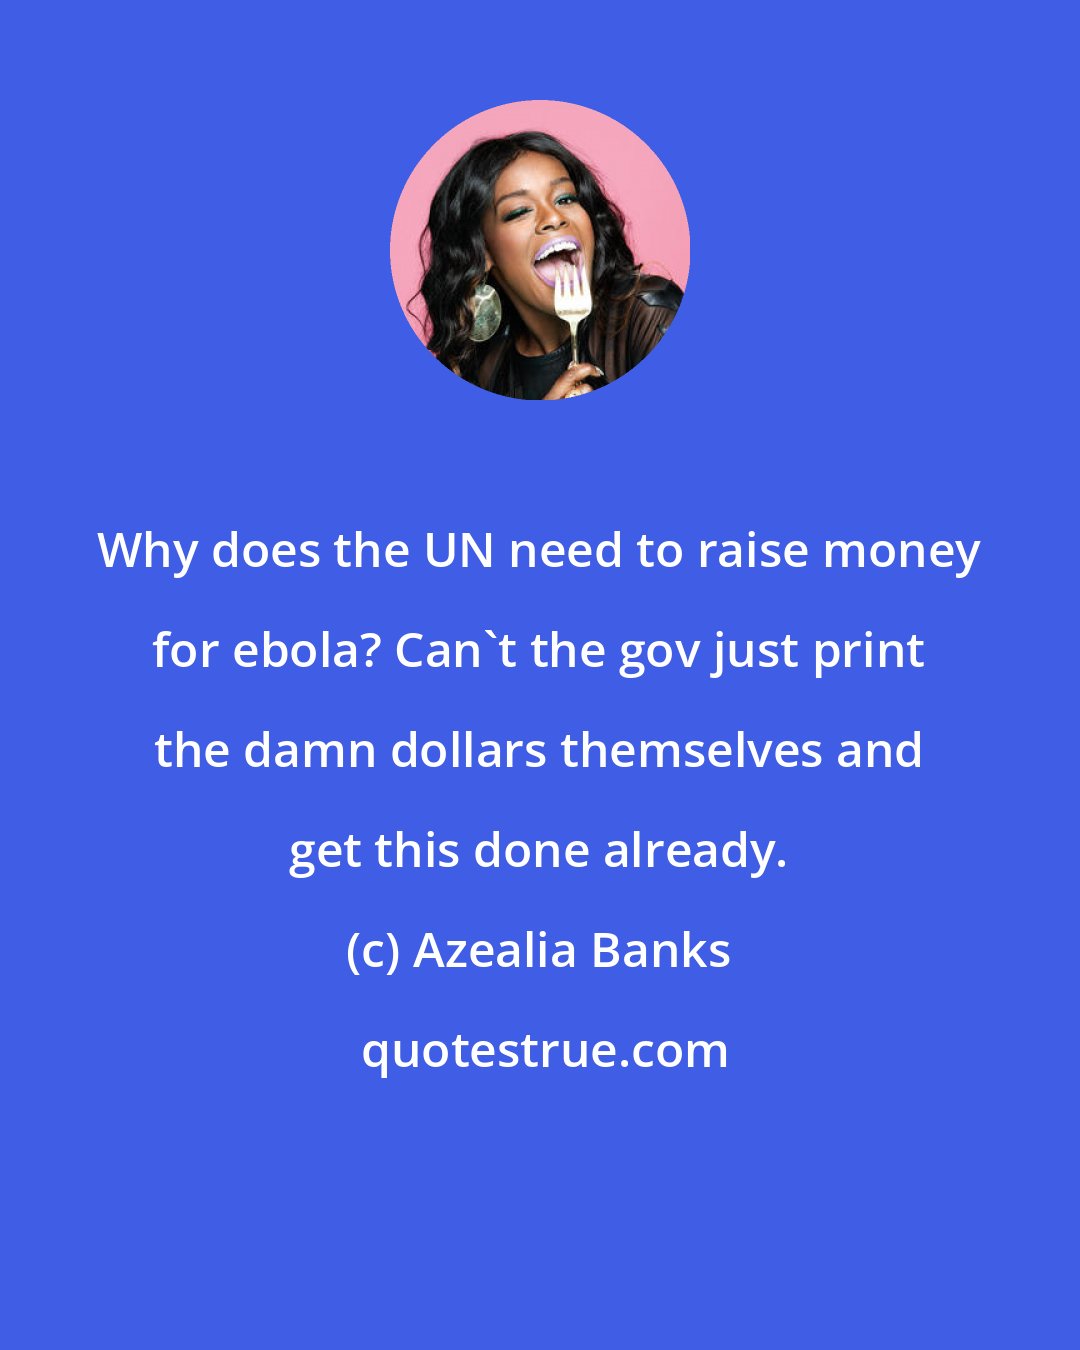 Azealia Banks: Why does the UN need to raise money for ebola? Can't the gov just print the damn dollars themselves and get this done already.